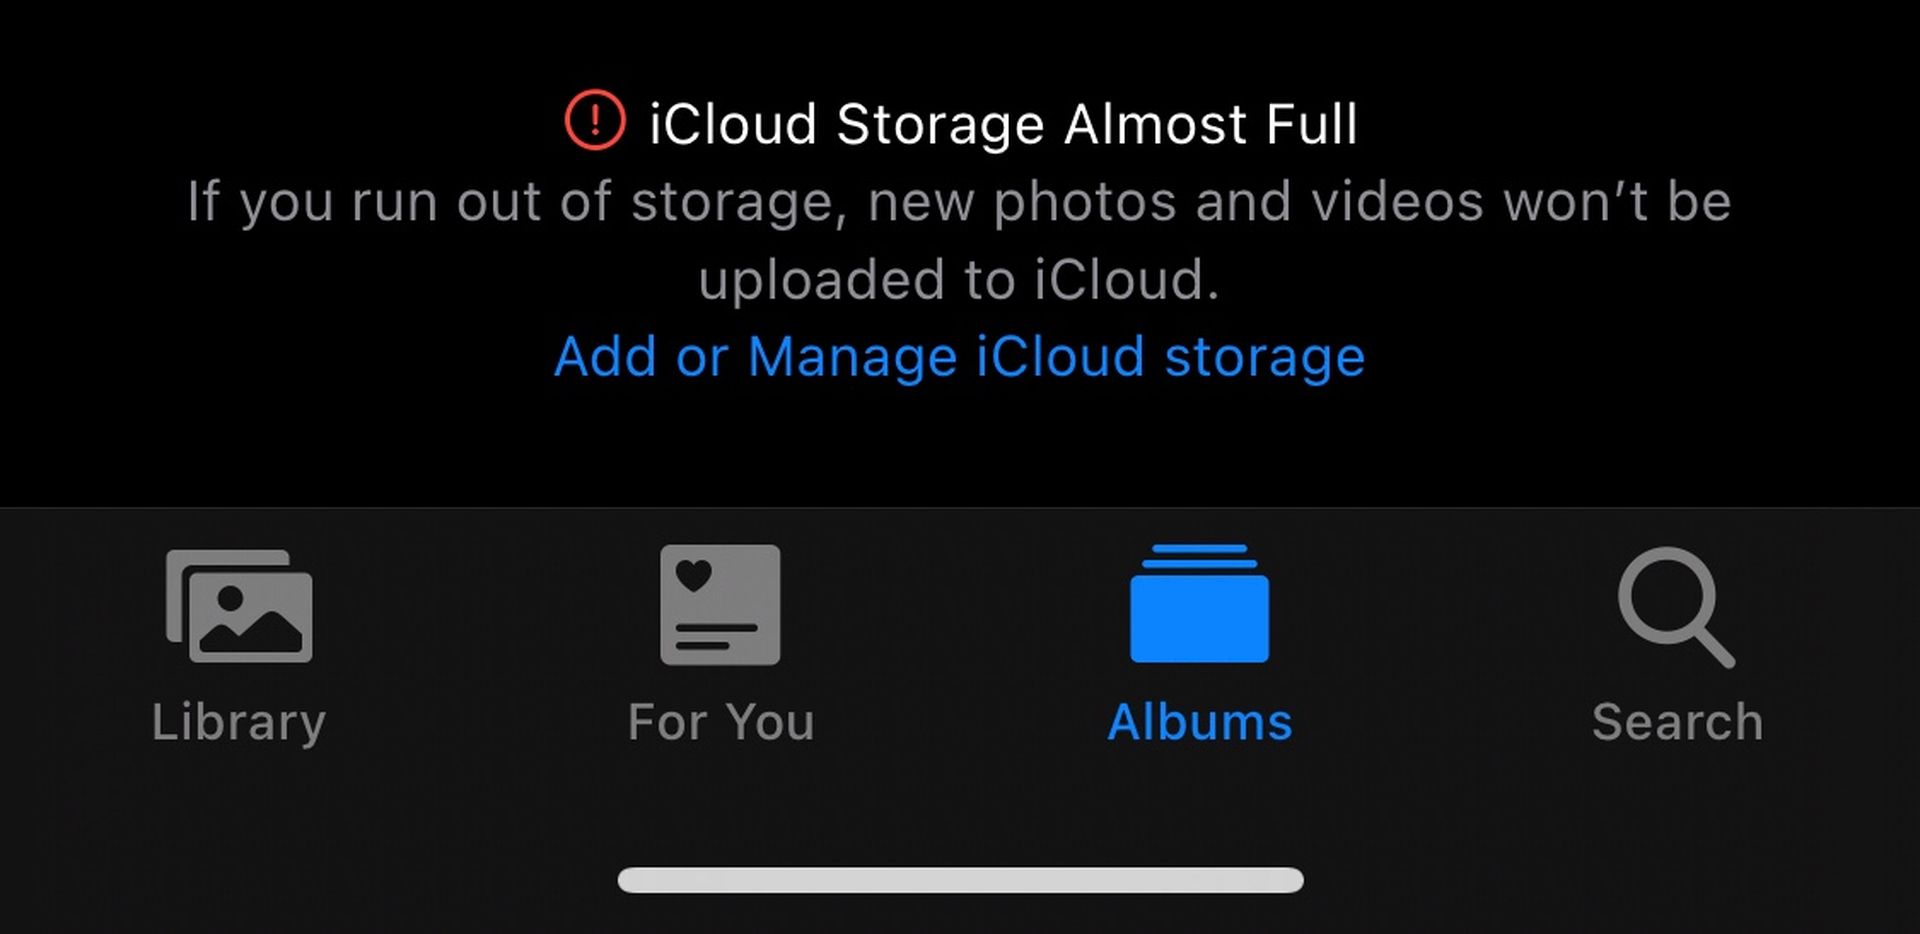 Discover the Apple iCloud lawsuit's impact on cloud storage. Allegations of monopolistic behavior raise questions on pricing and device integration. Learn more now!